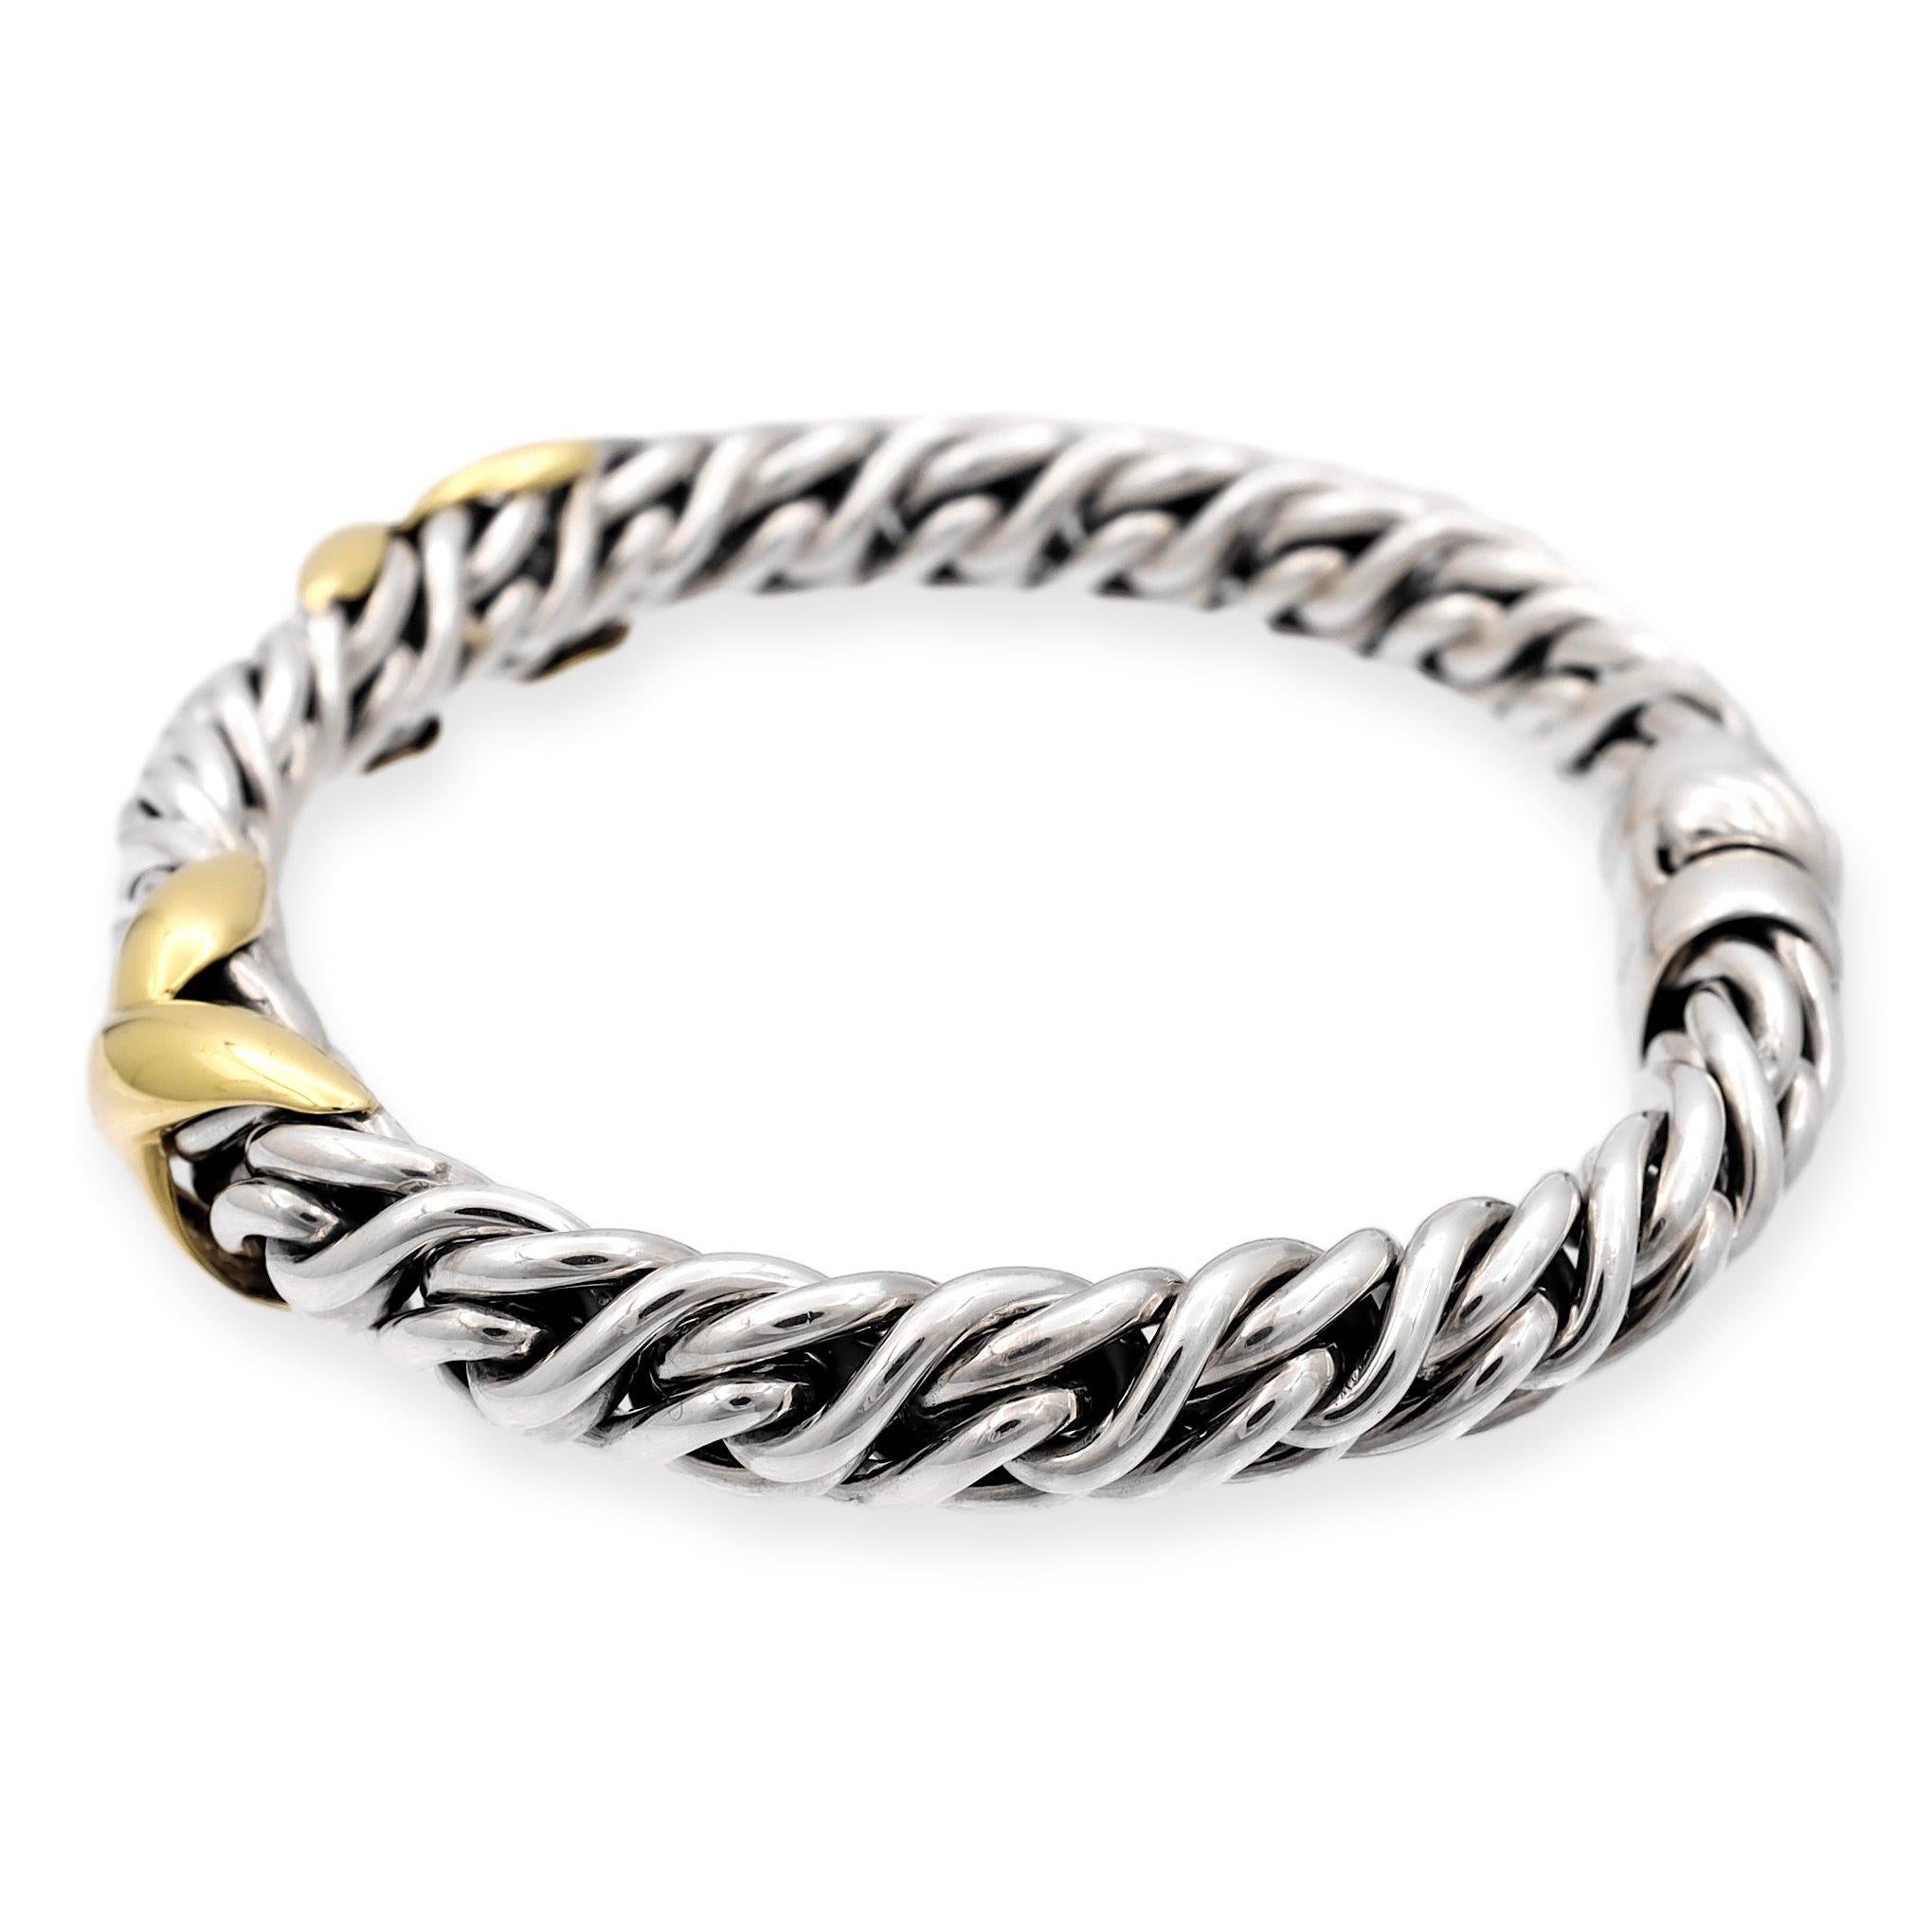 Adorn your wrist with the exquisite beauty of the David Yurman Lyrica Collection bracelet. Finely crafted in sterling silver, this bracelet showcases two elegant X motif stations in 18K yellow gold, seamlessly integrated into a classic wheat chain